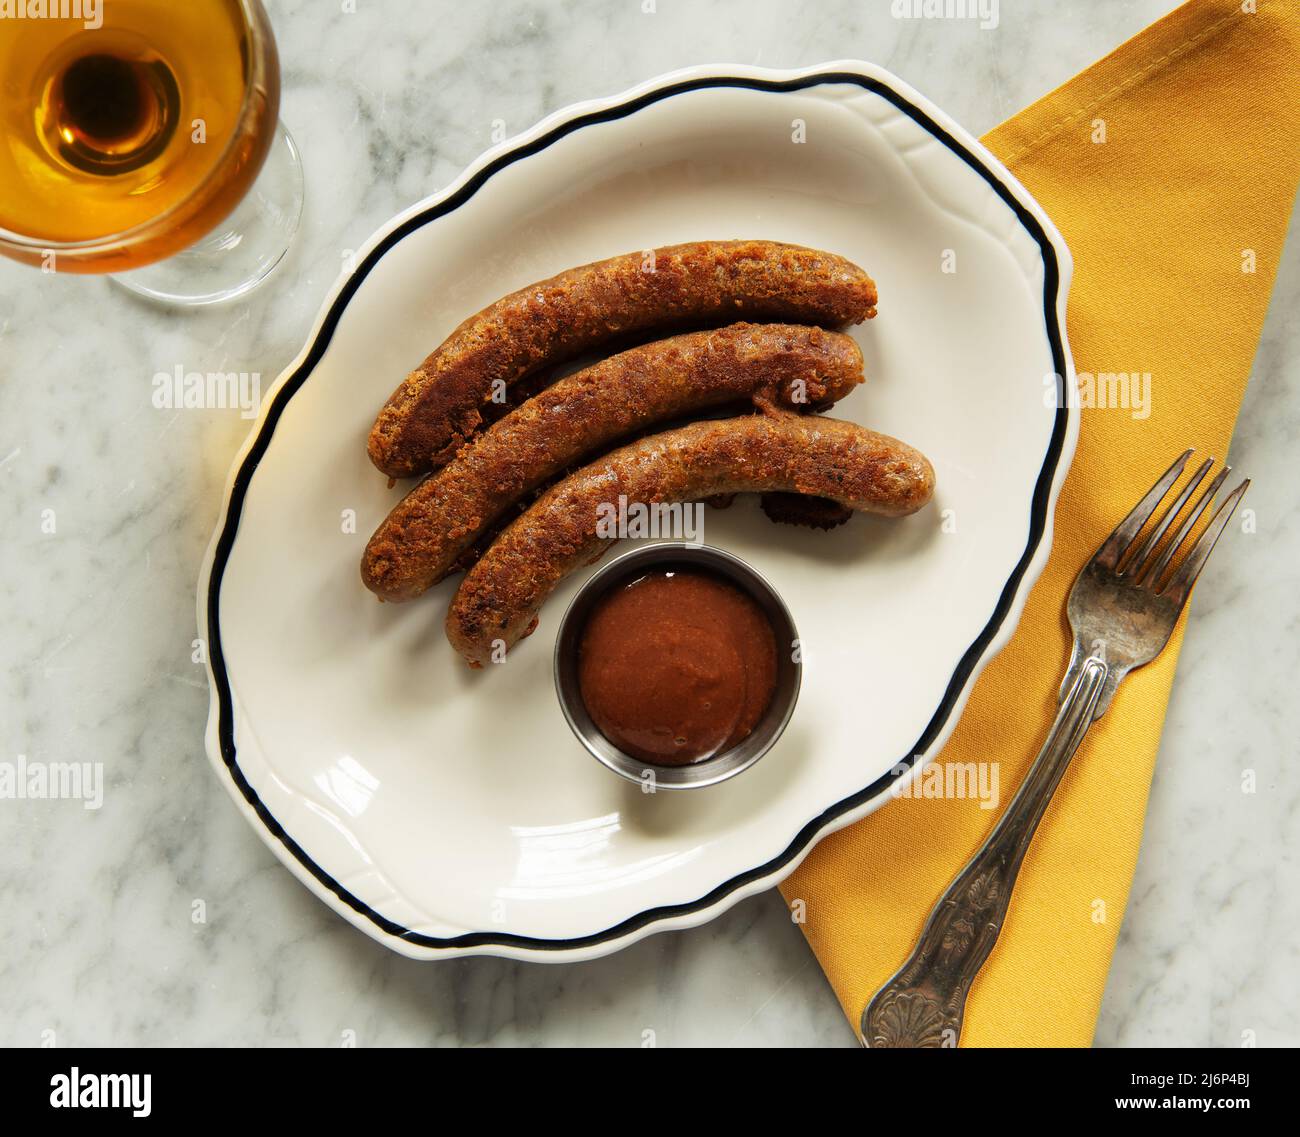 Fried sausages with ketchup and a cocktail Stock Photo